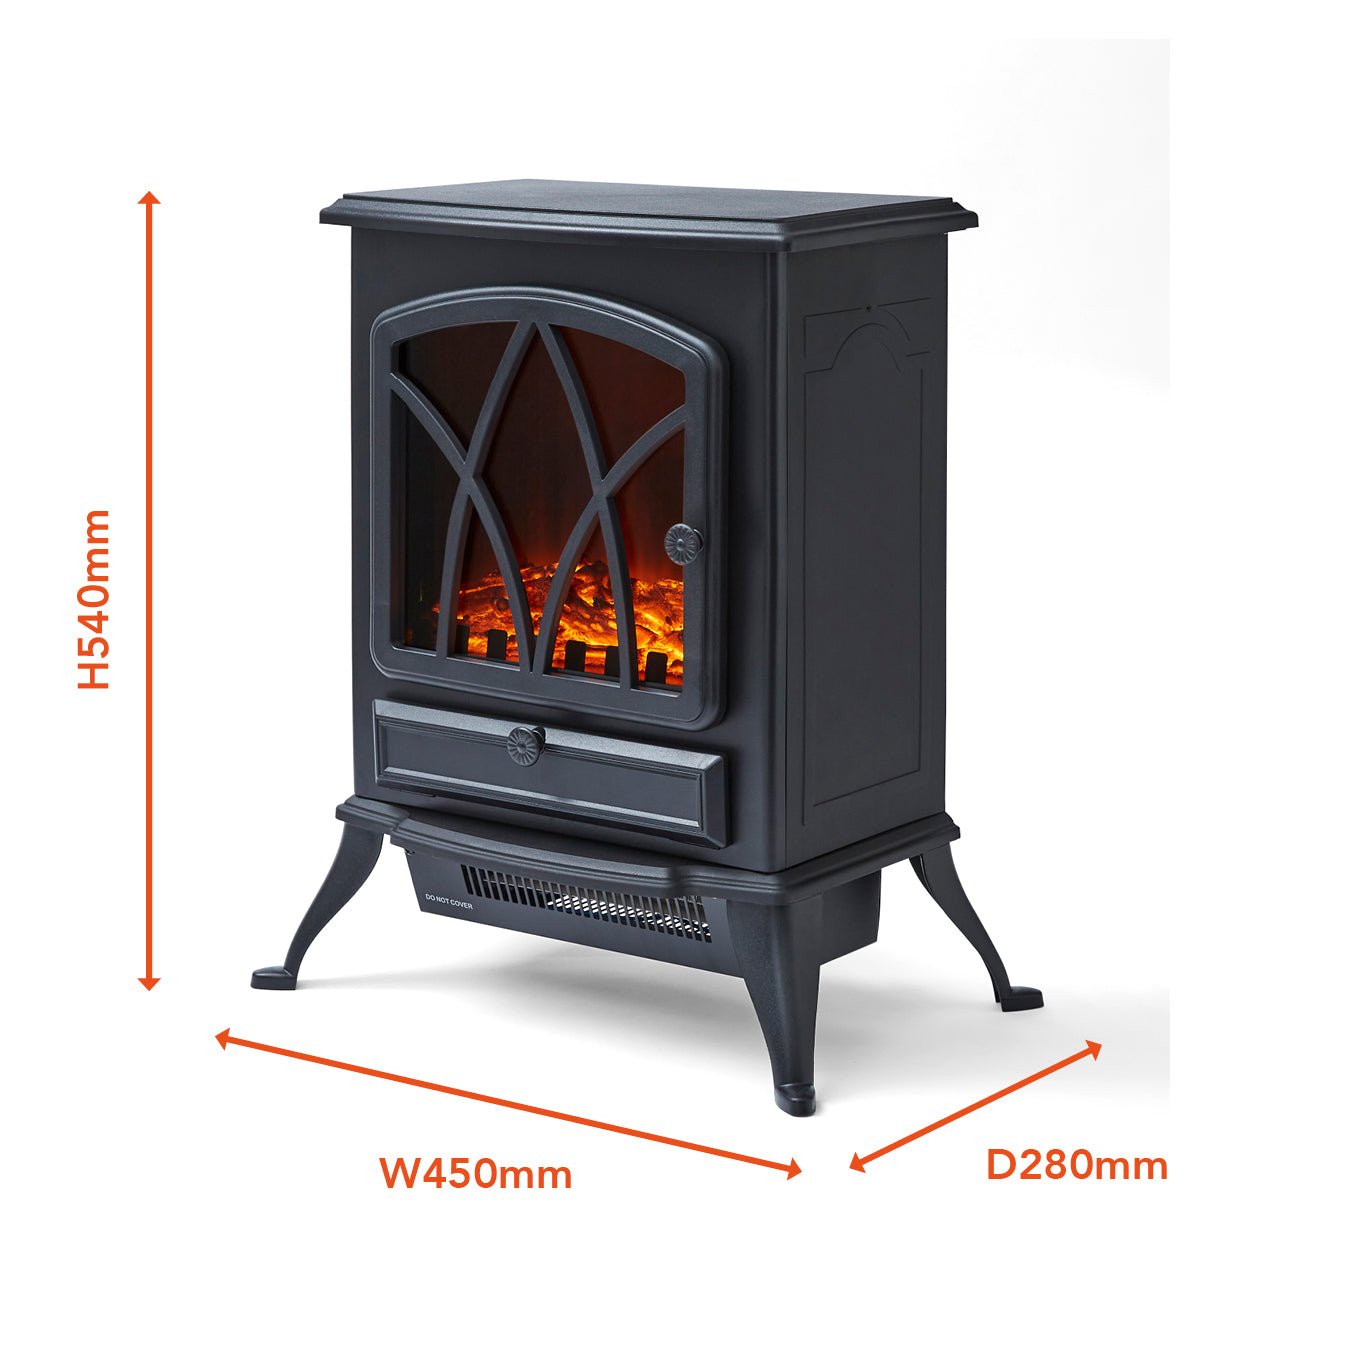 2KW Stirling Black Electric Stove Fire